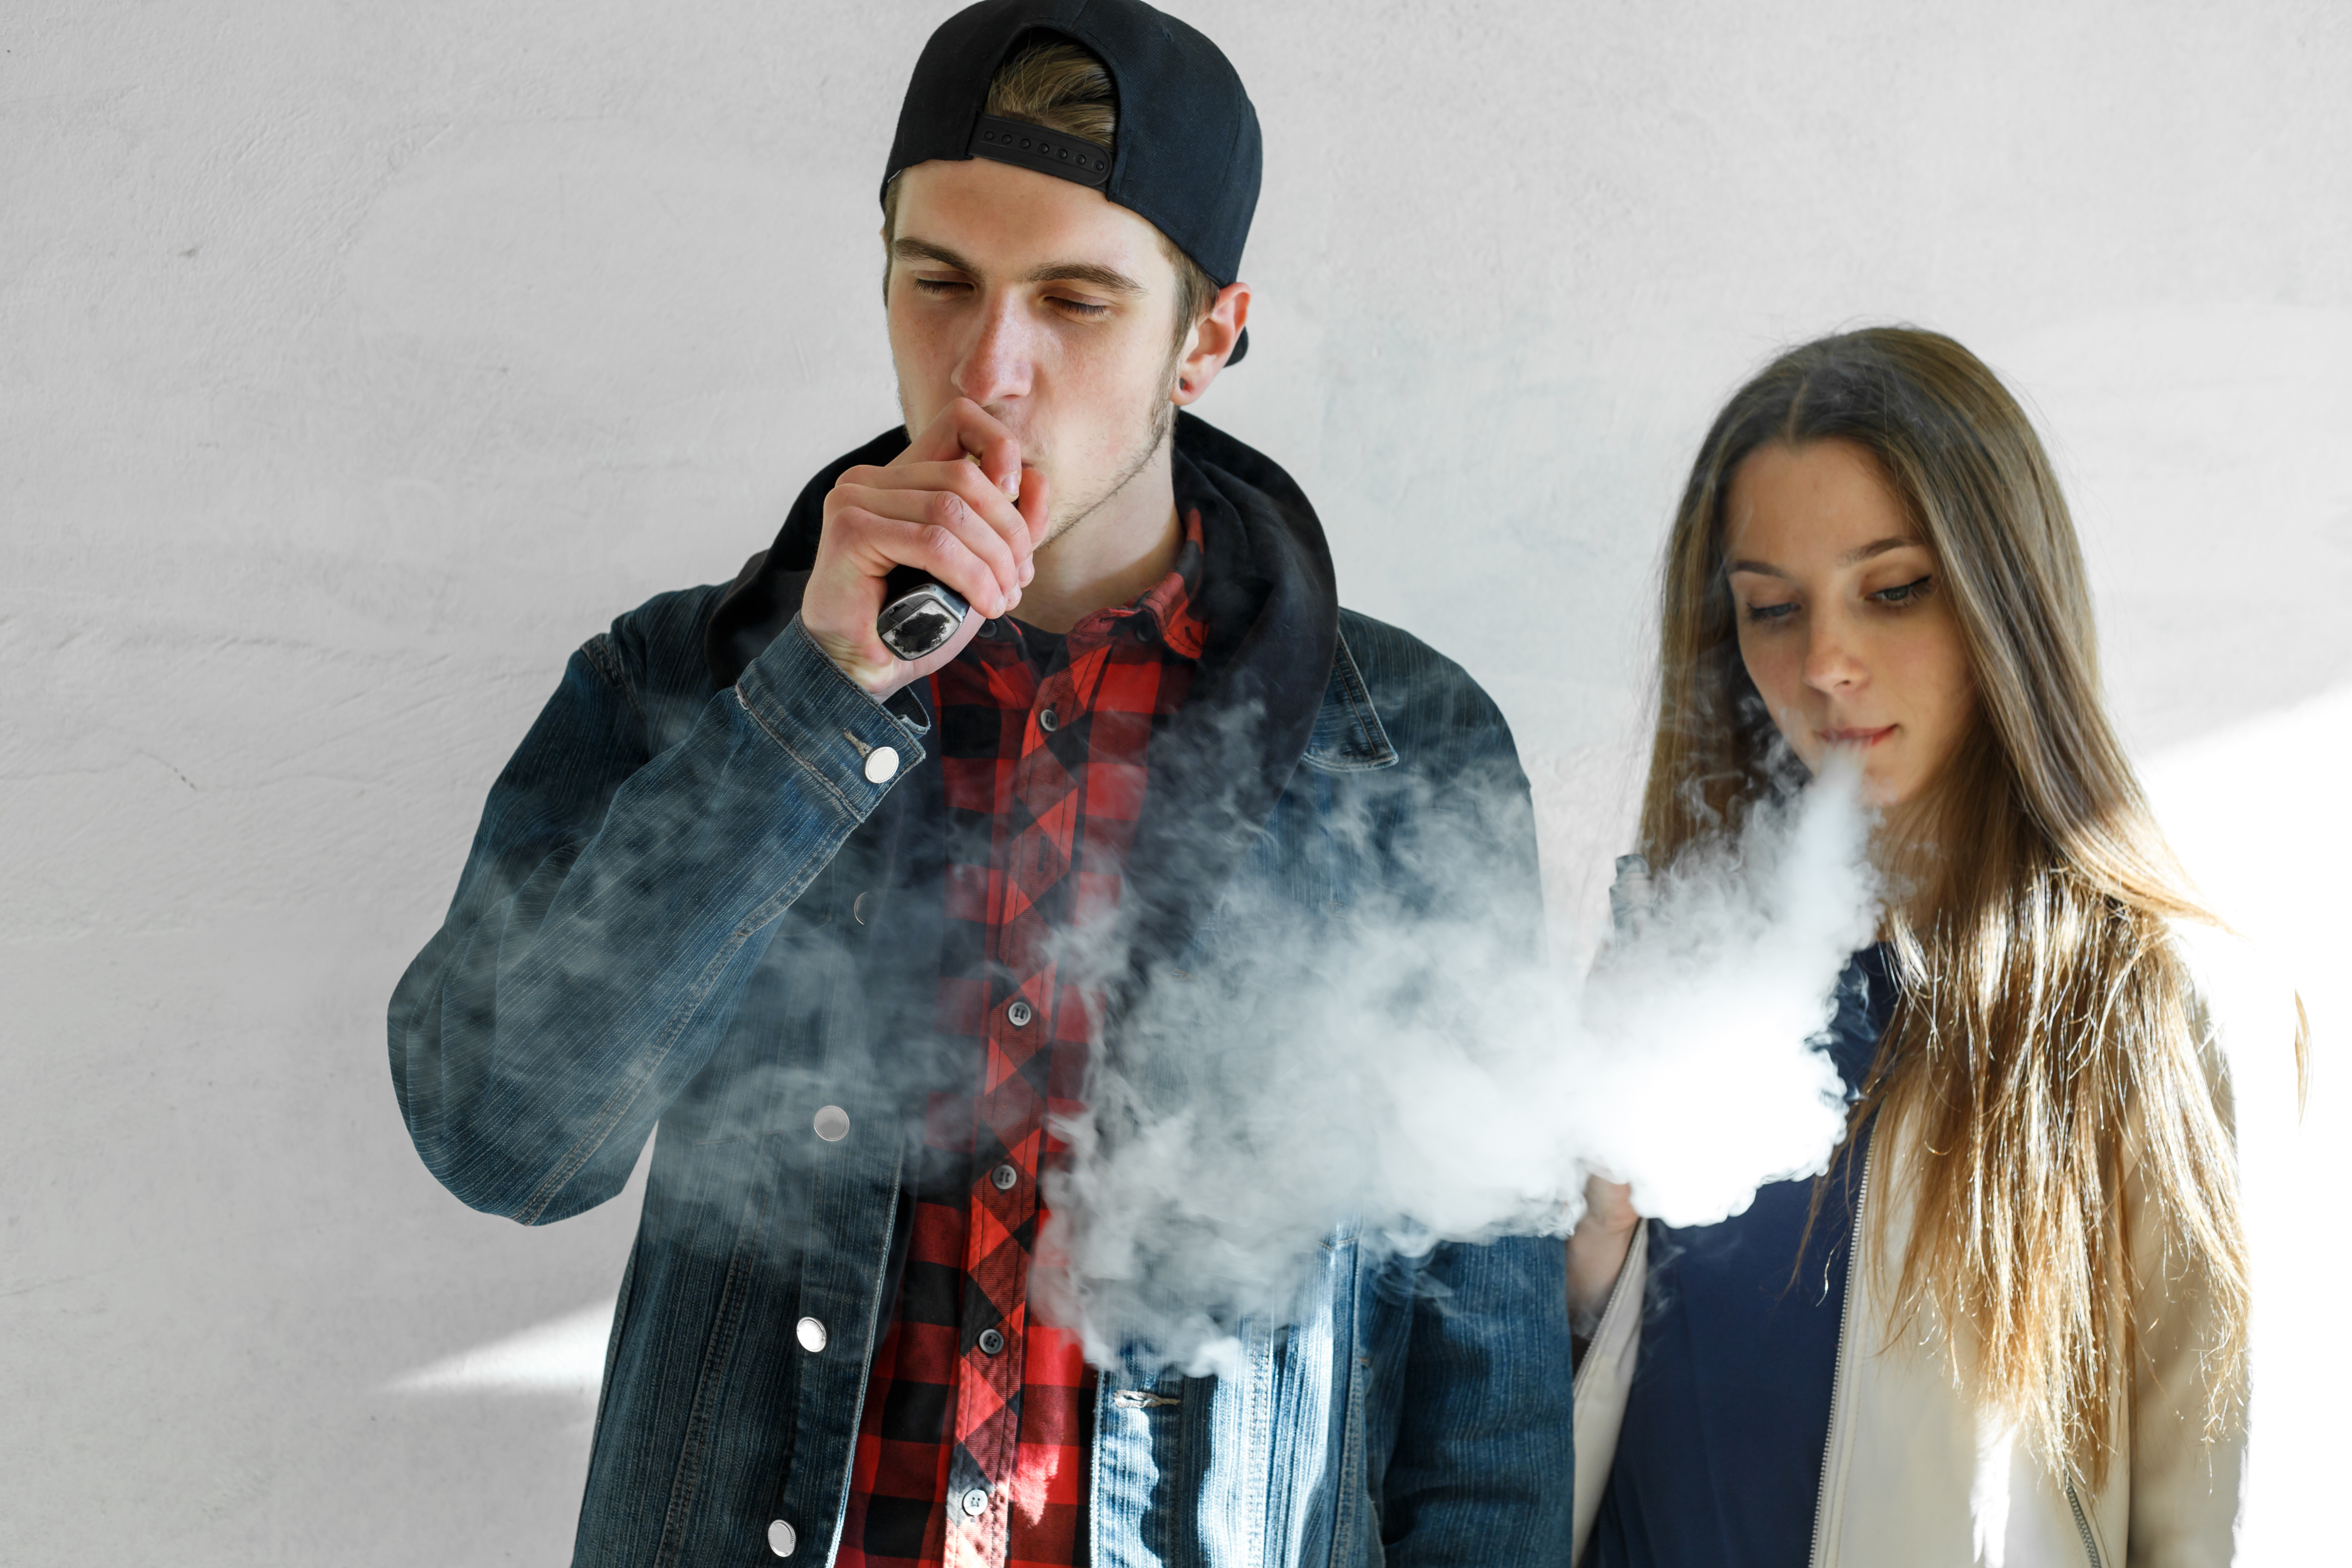 Facts about Vaping